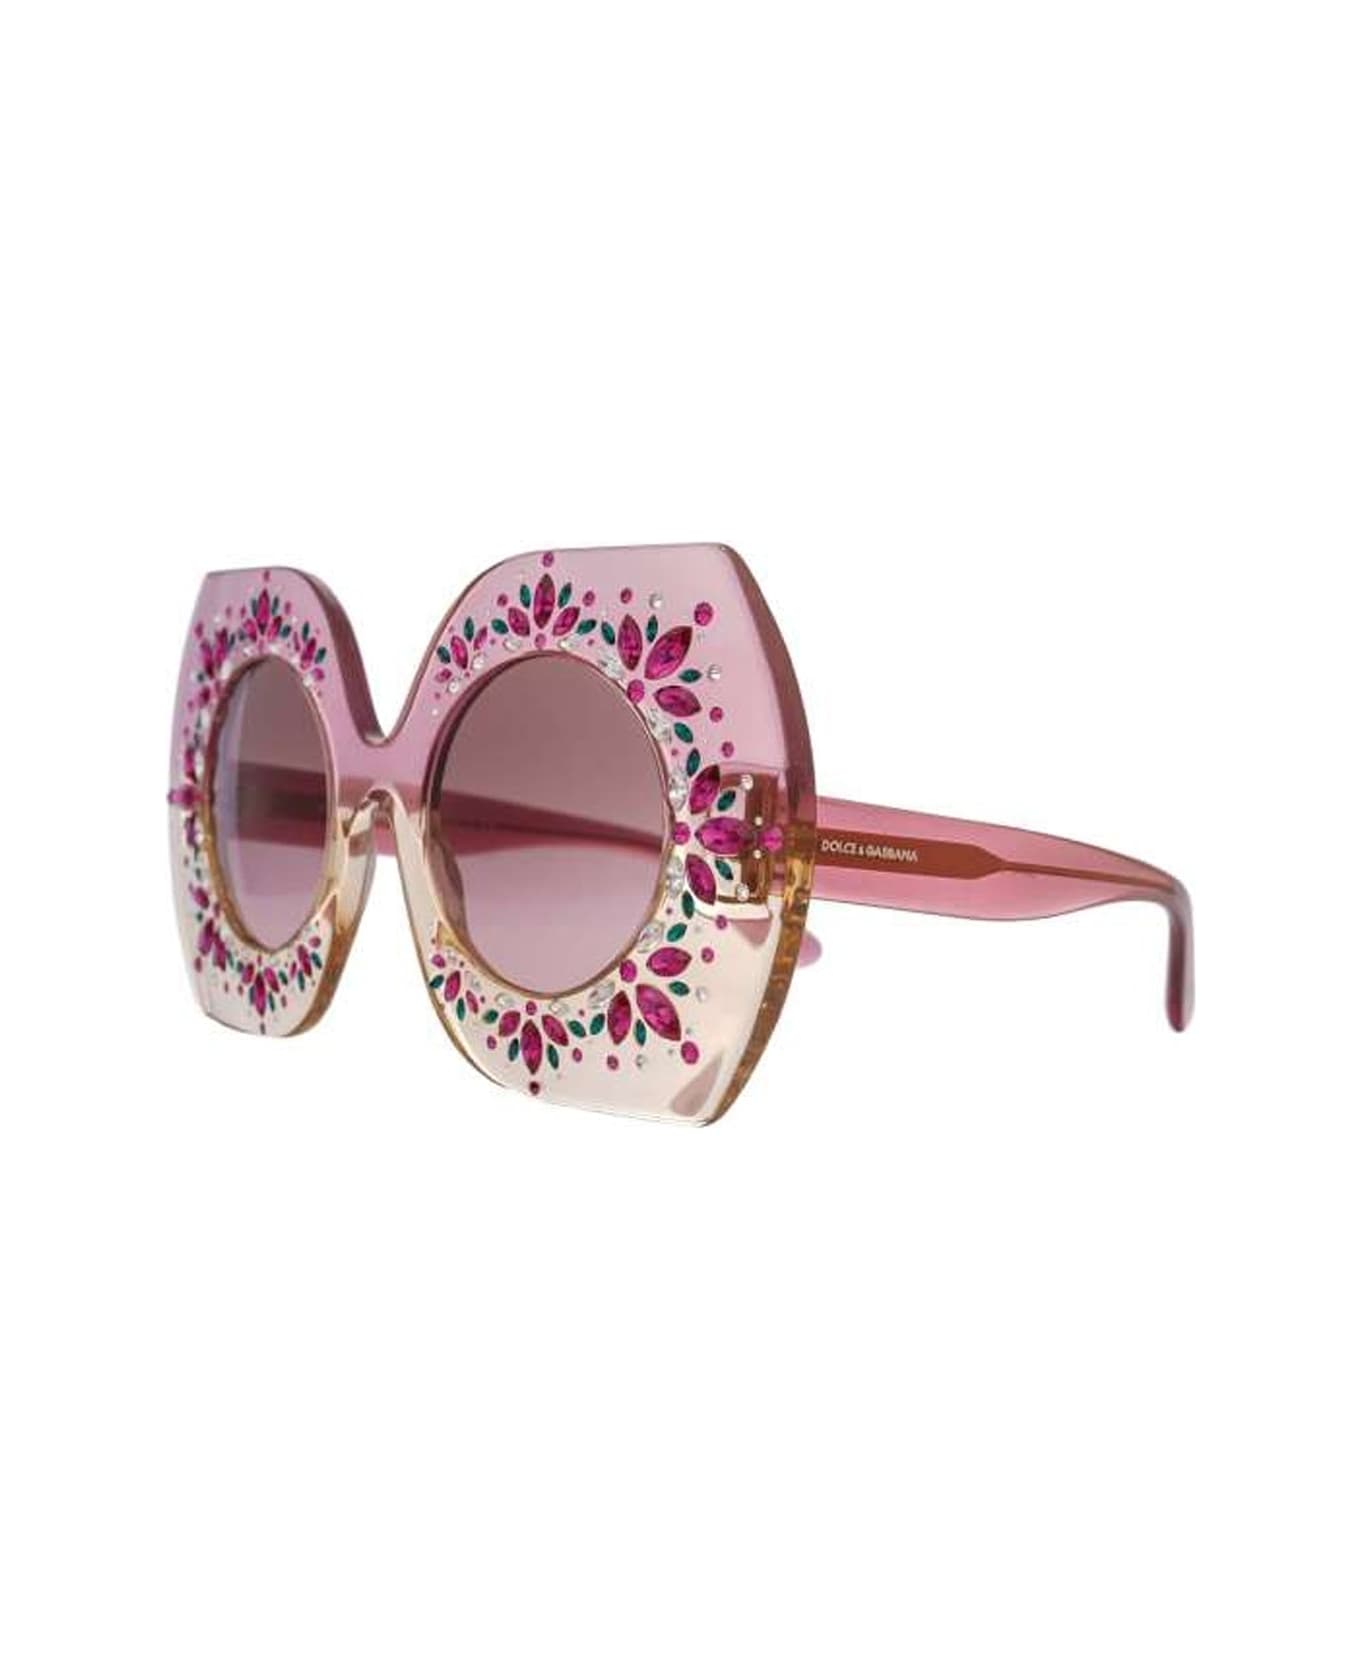 Dolce & Gabbana Limited Edition Crystal Sunglasses - Pink